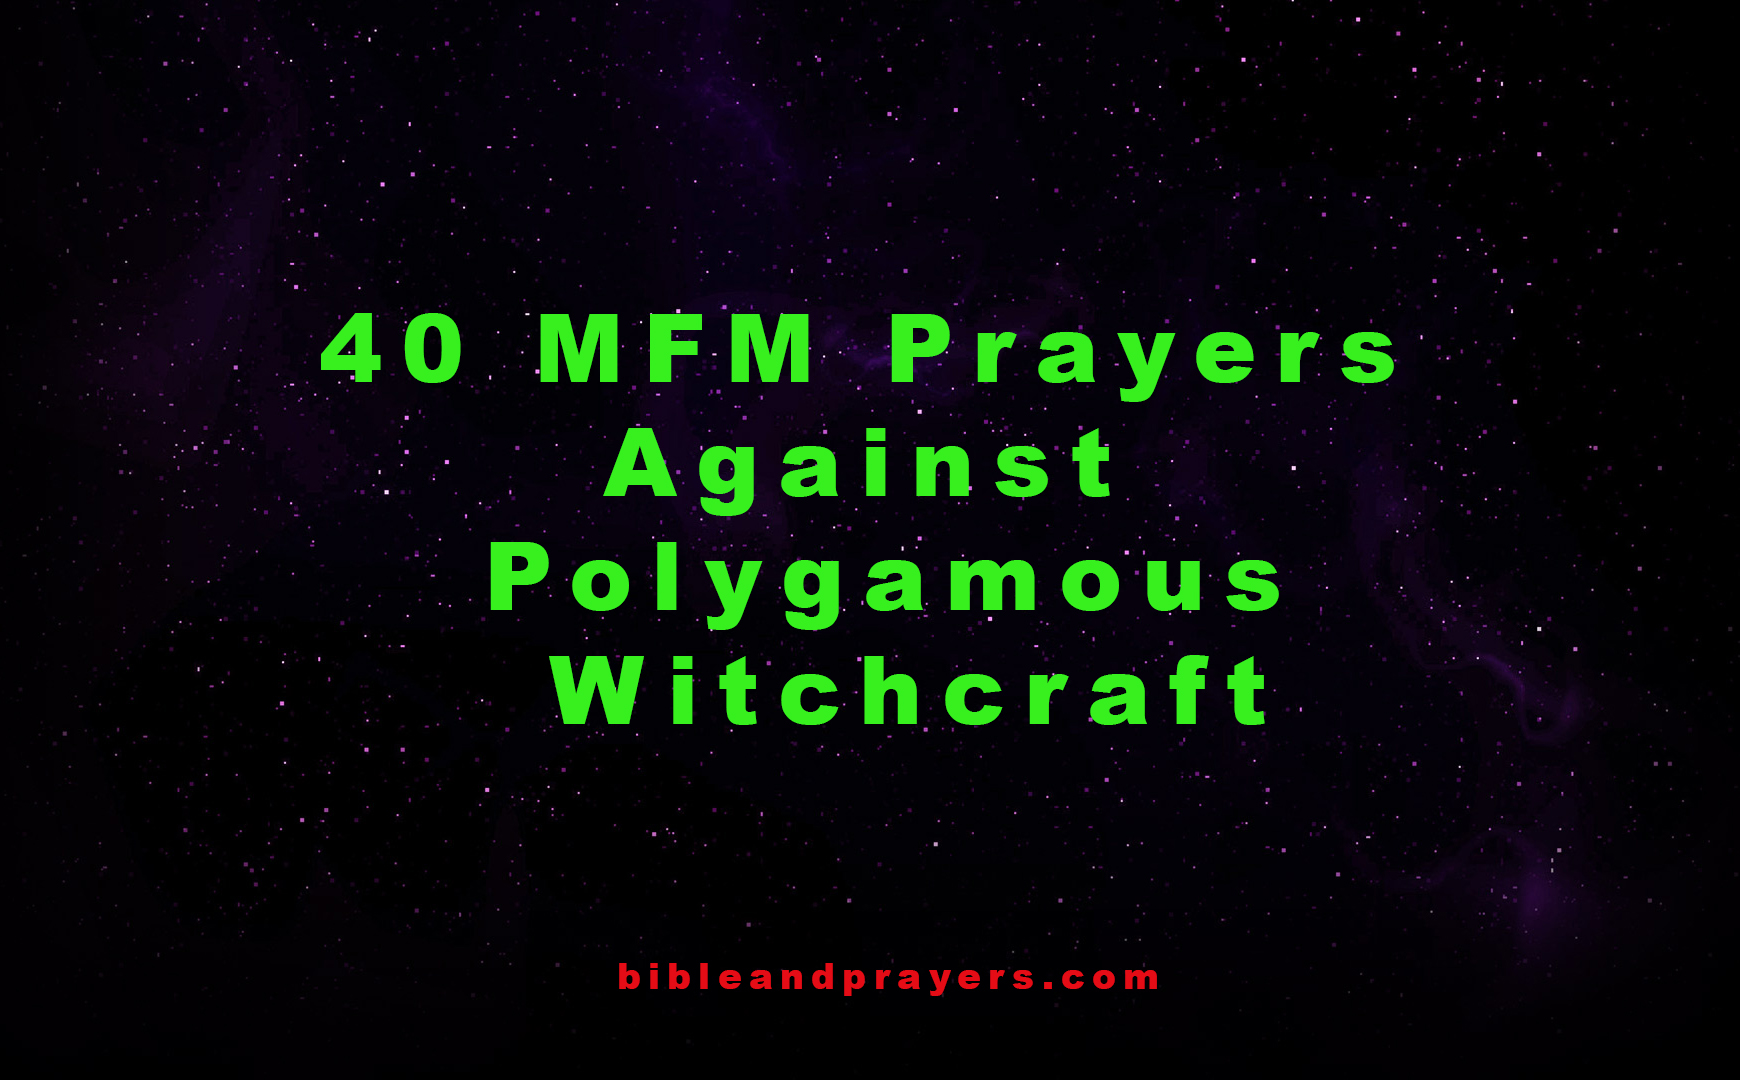 40 MFM Prayers Against Polygamous Witchcraft